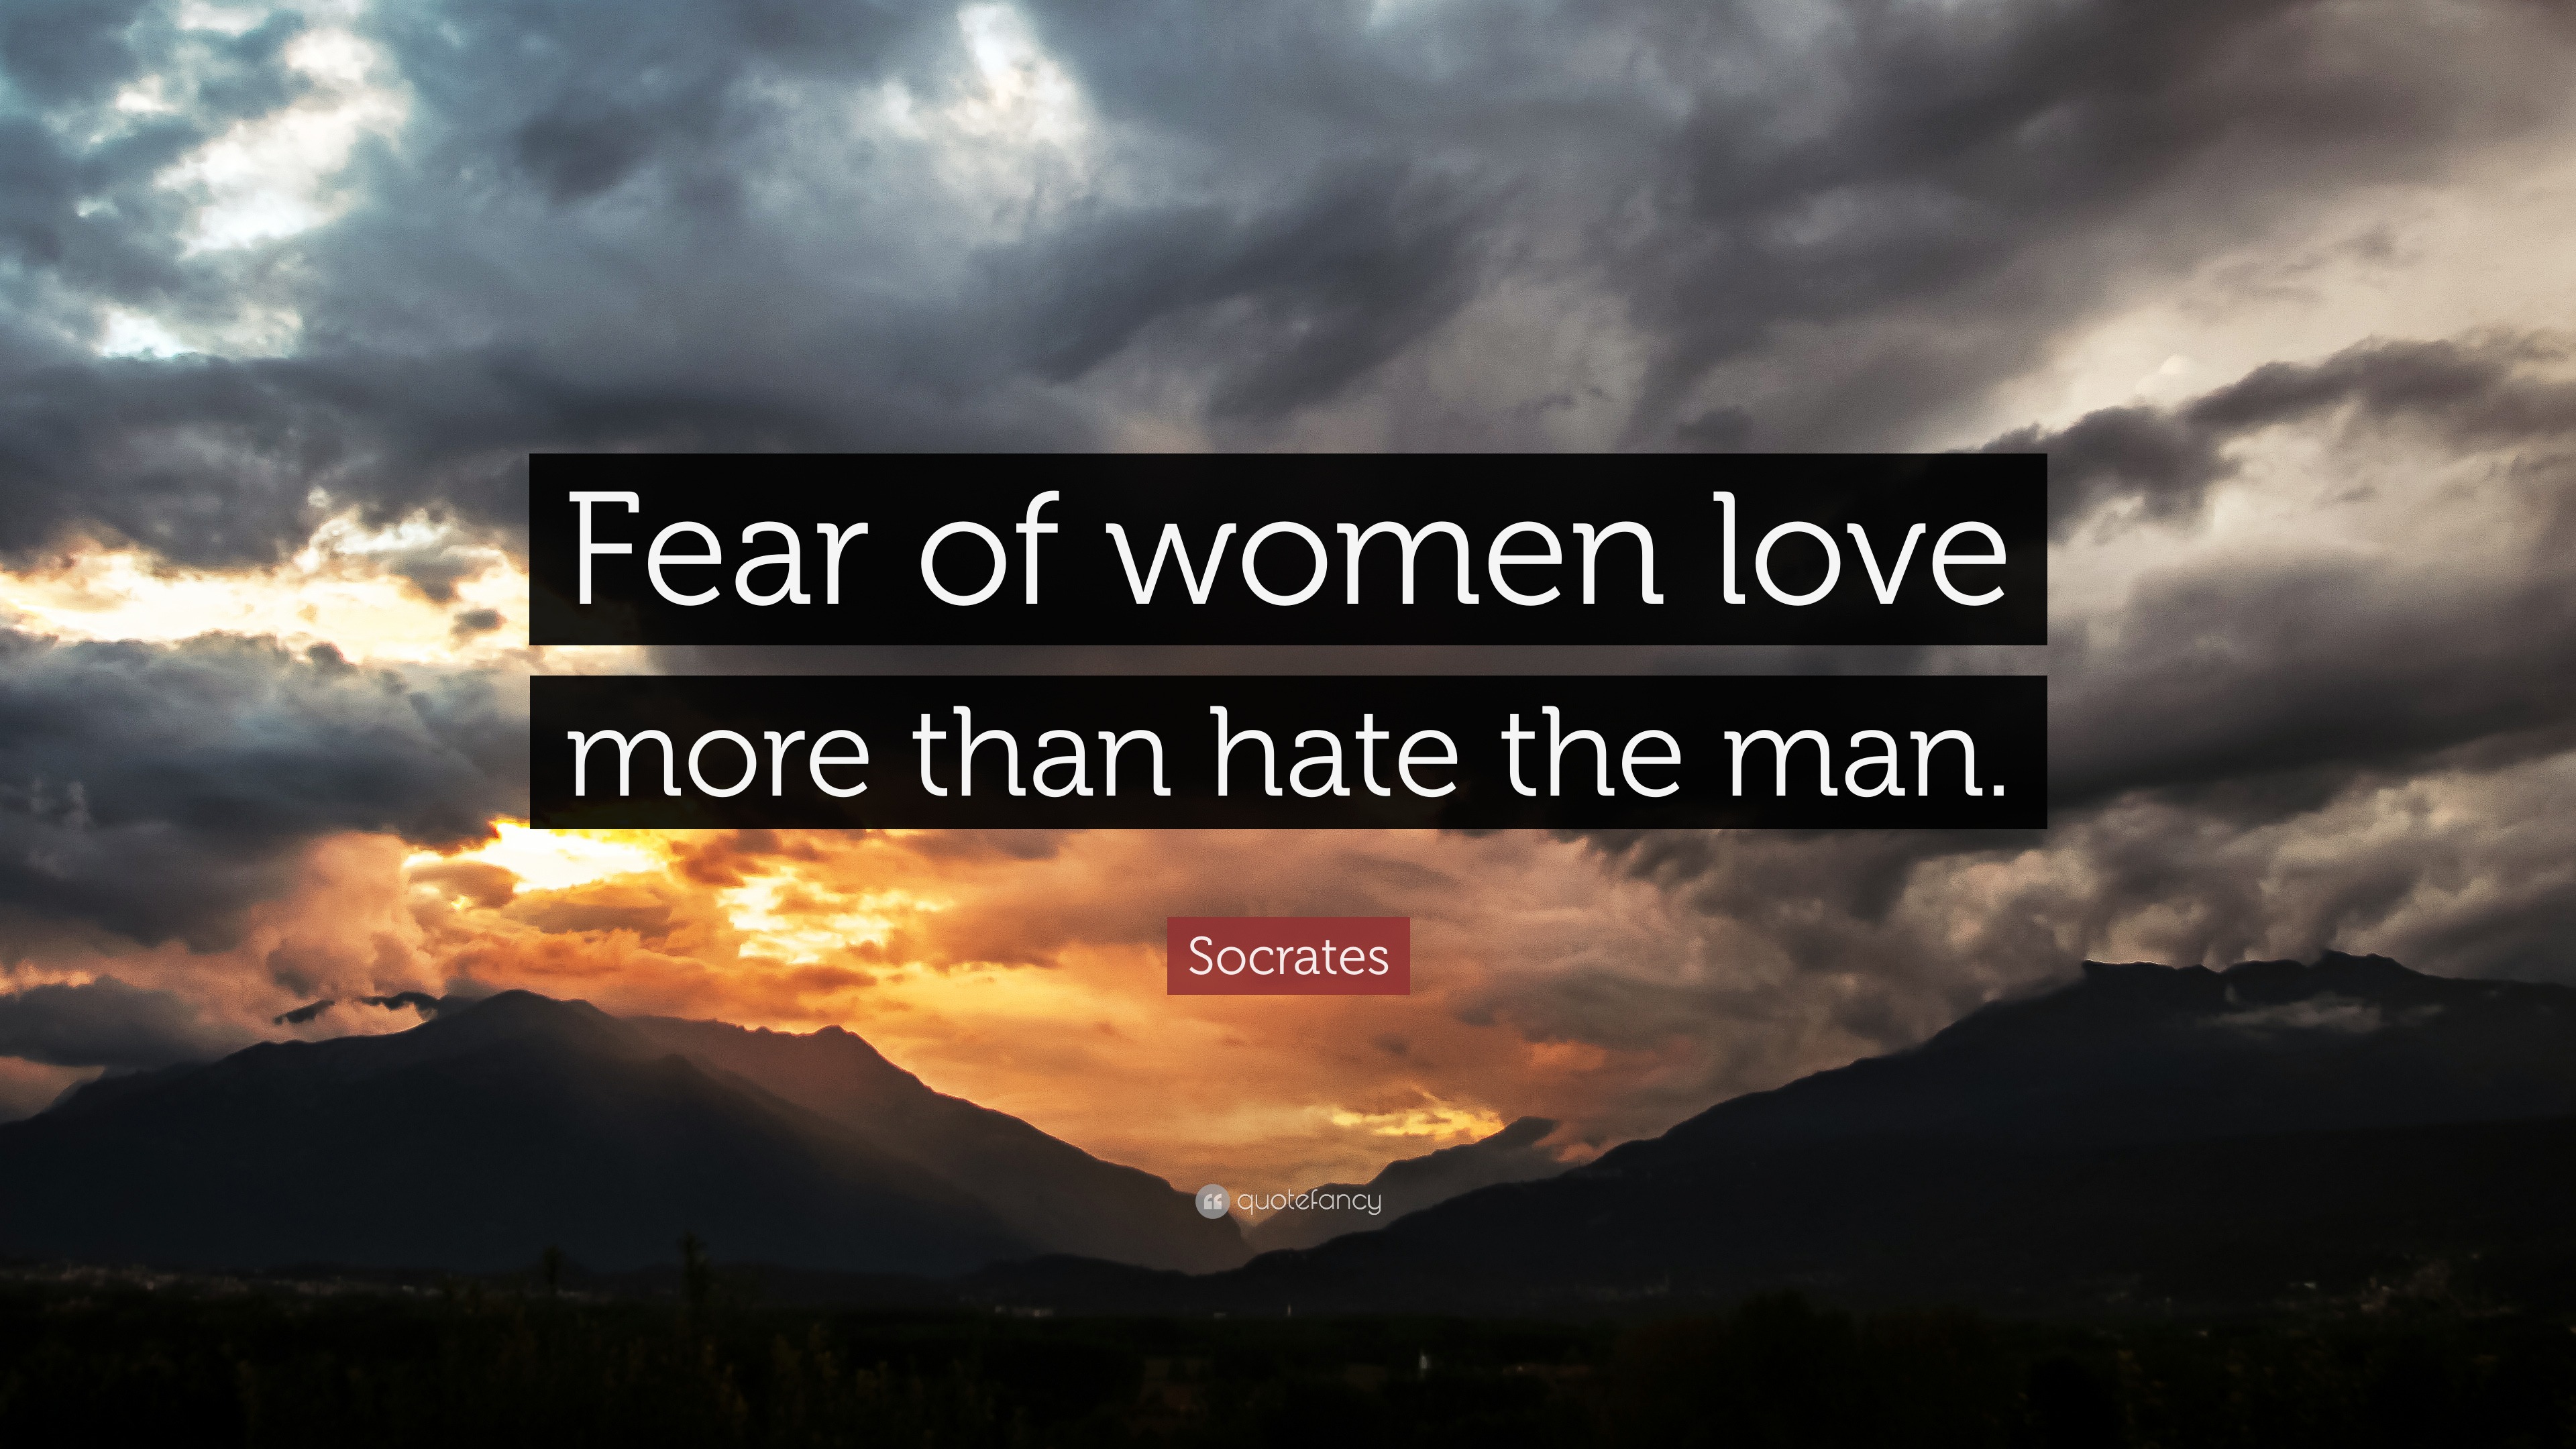 socrates quotes about women